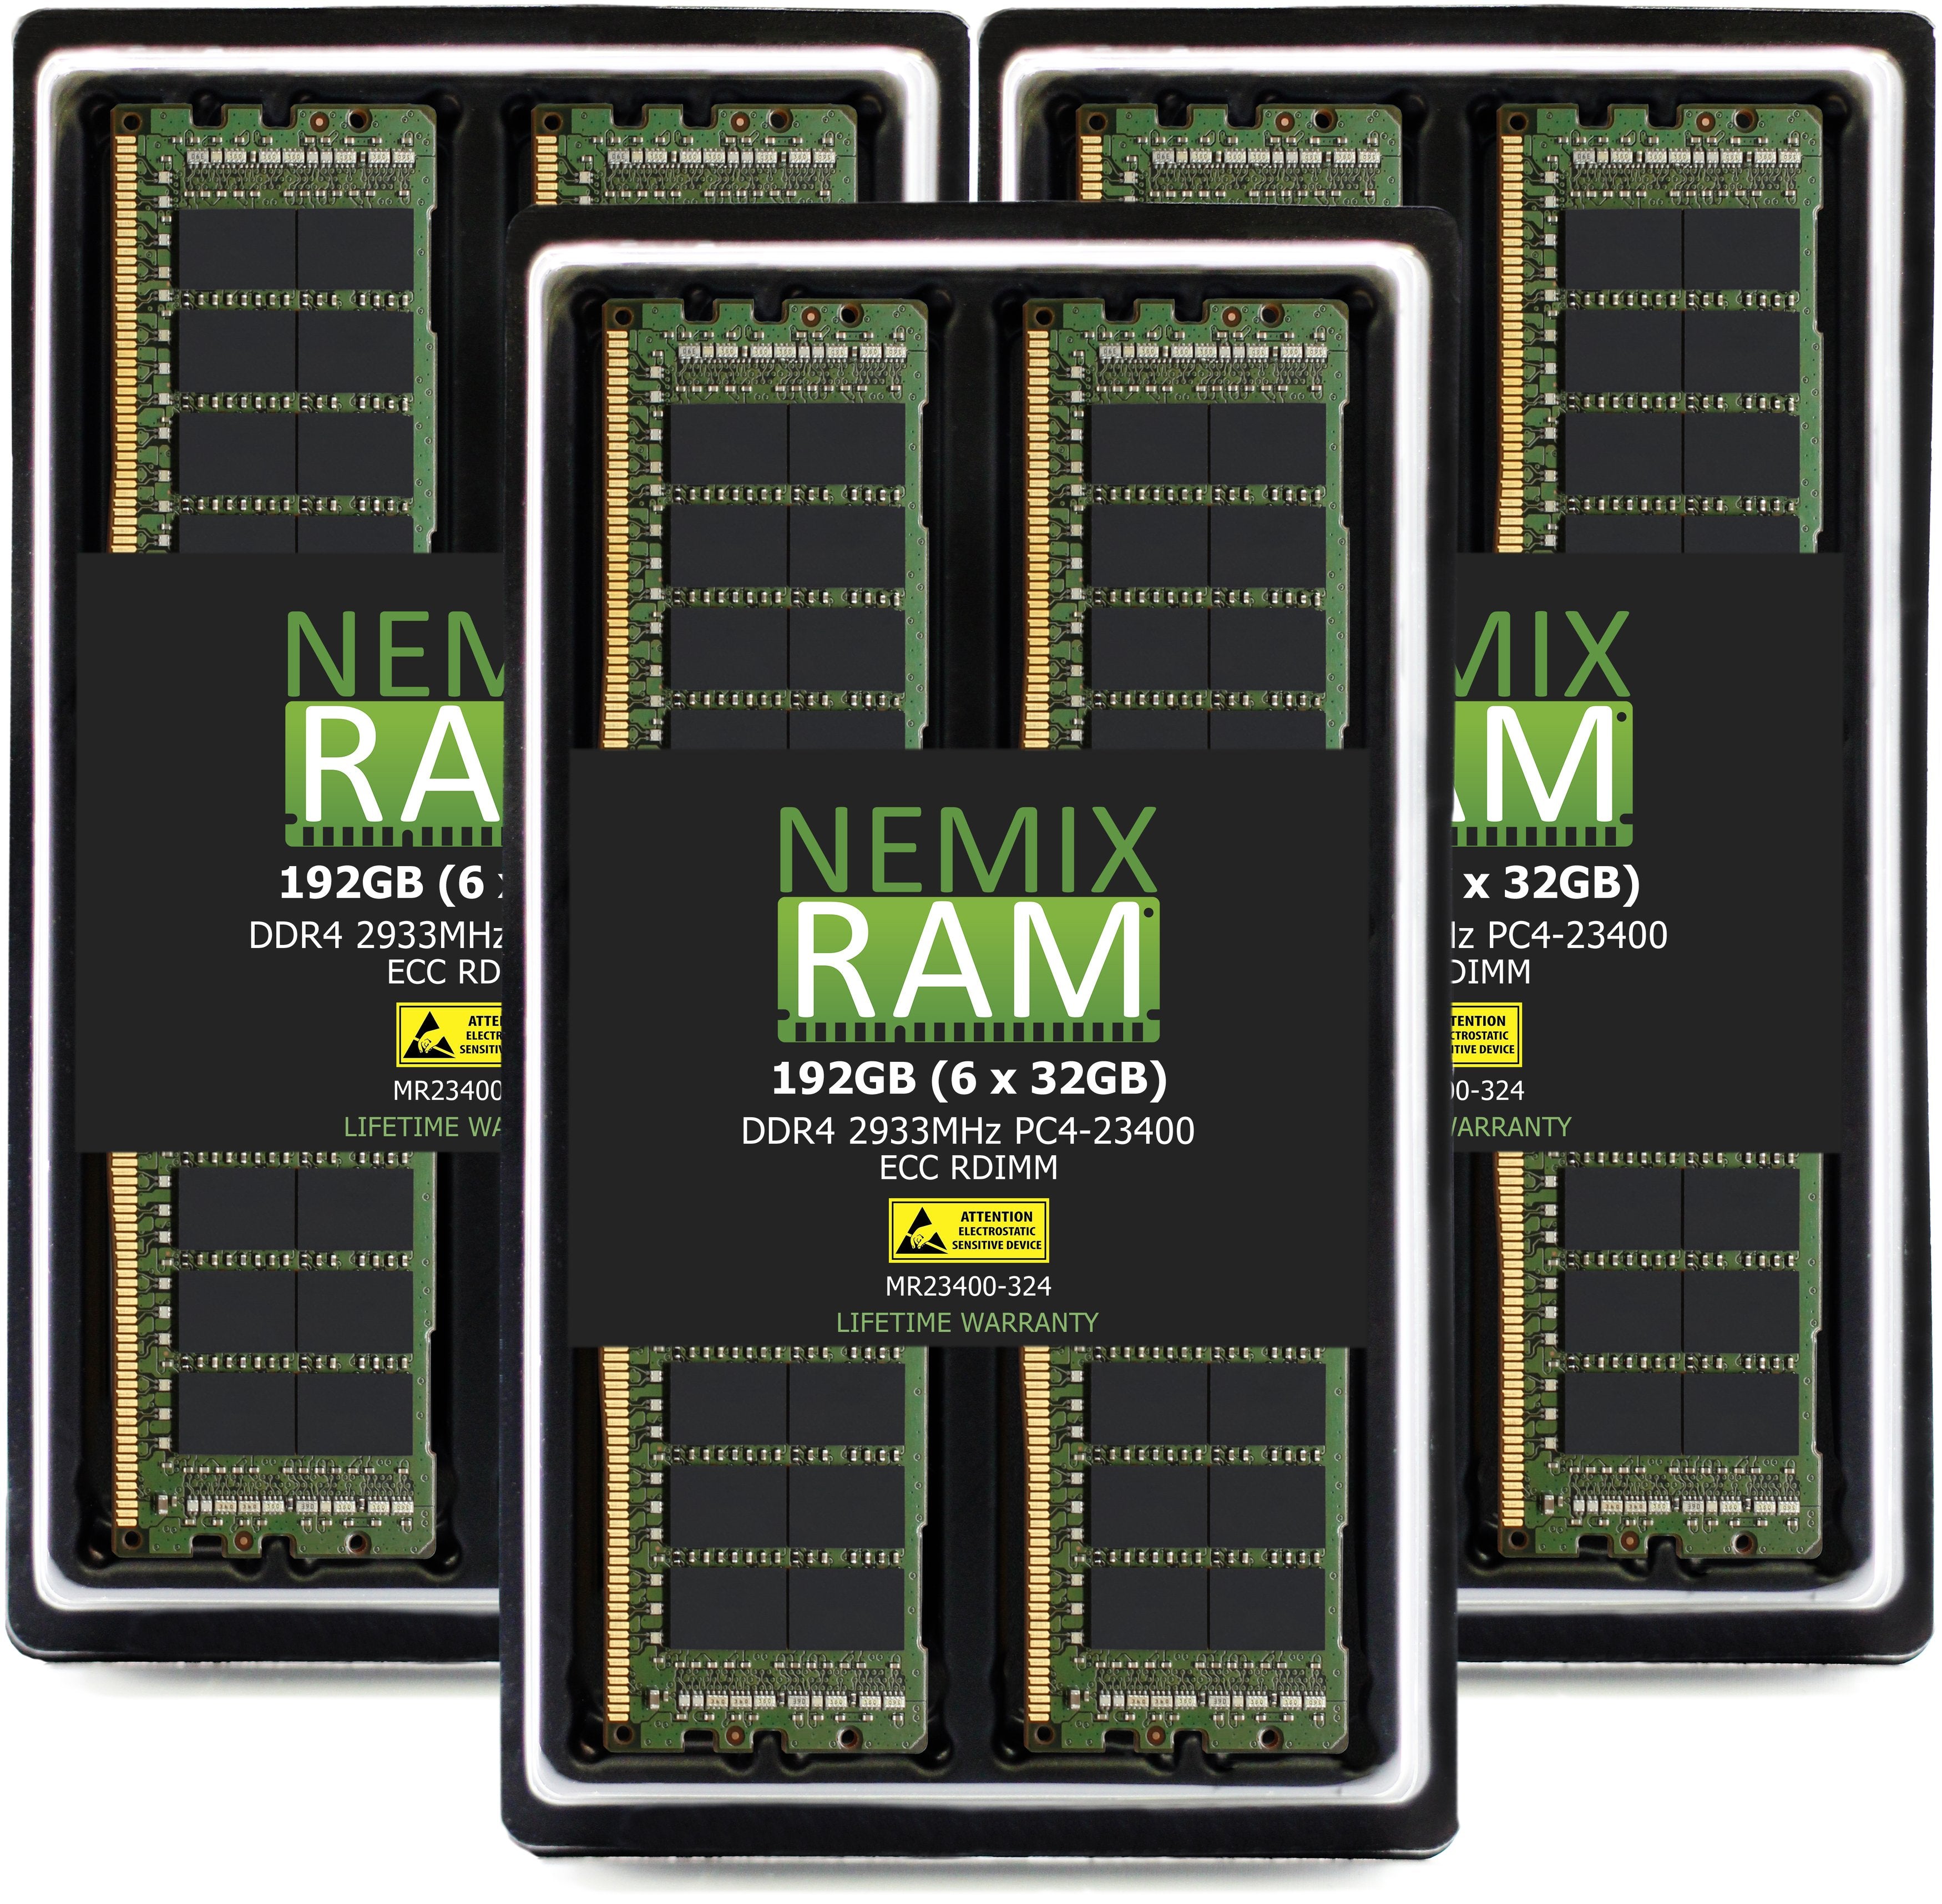 DDR4 2933MHZ PC4-23400 RDIMM for Apple Mac Pro Rack 2020 7,1